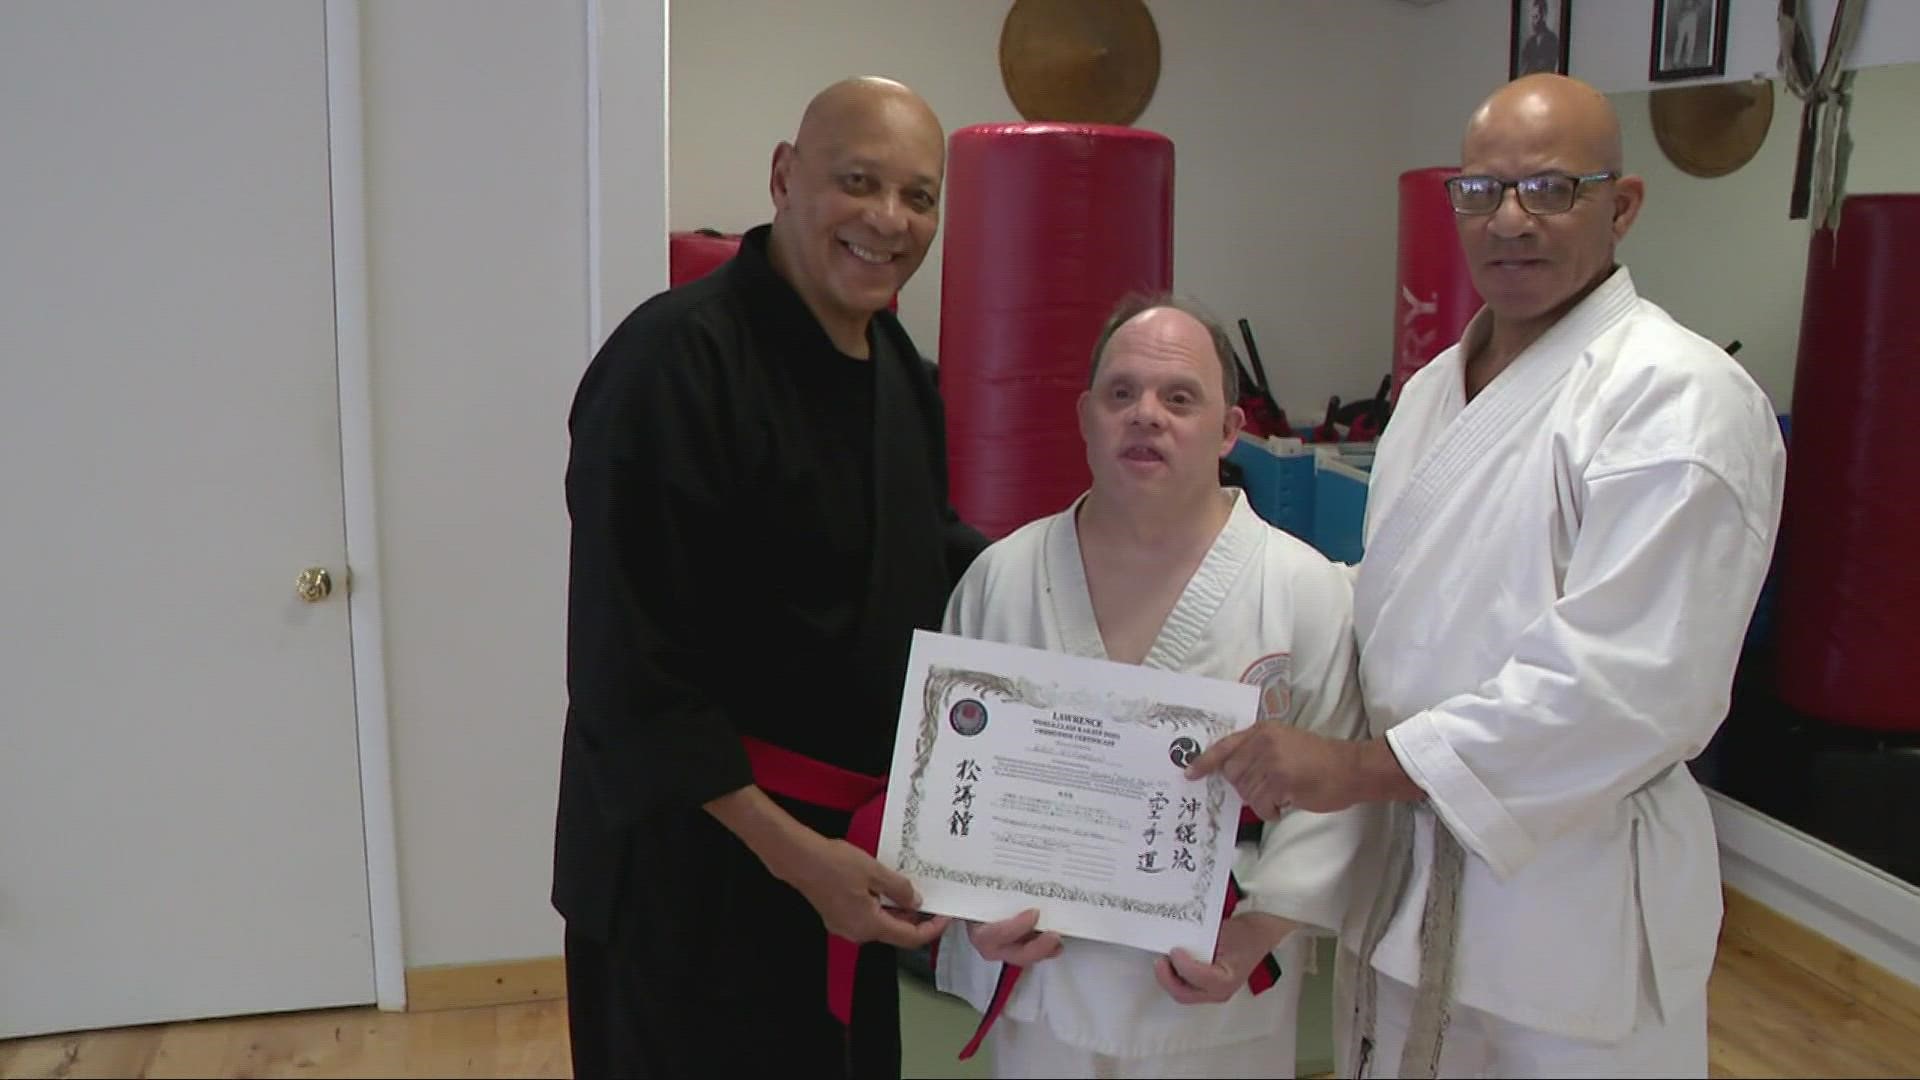 A 59-year-old New York man with Down Syndrome has earned his 5th-degree black belt in karate. Congratulations to Eric Sharoun.